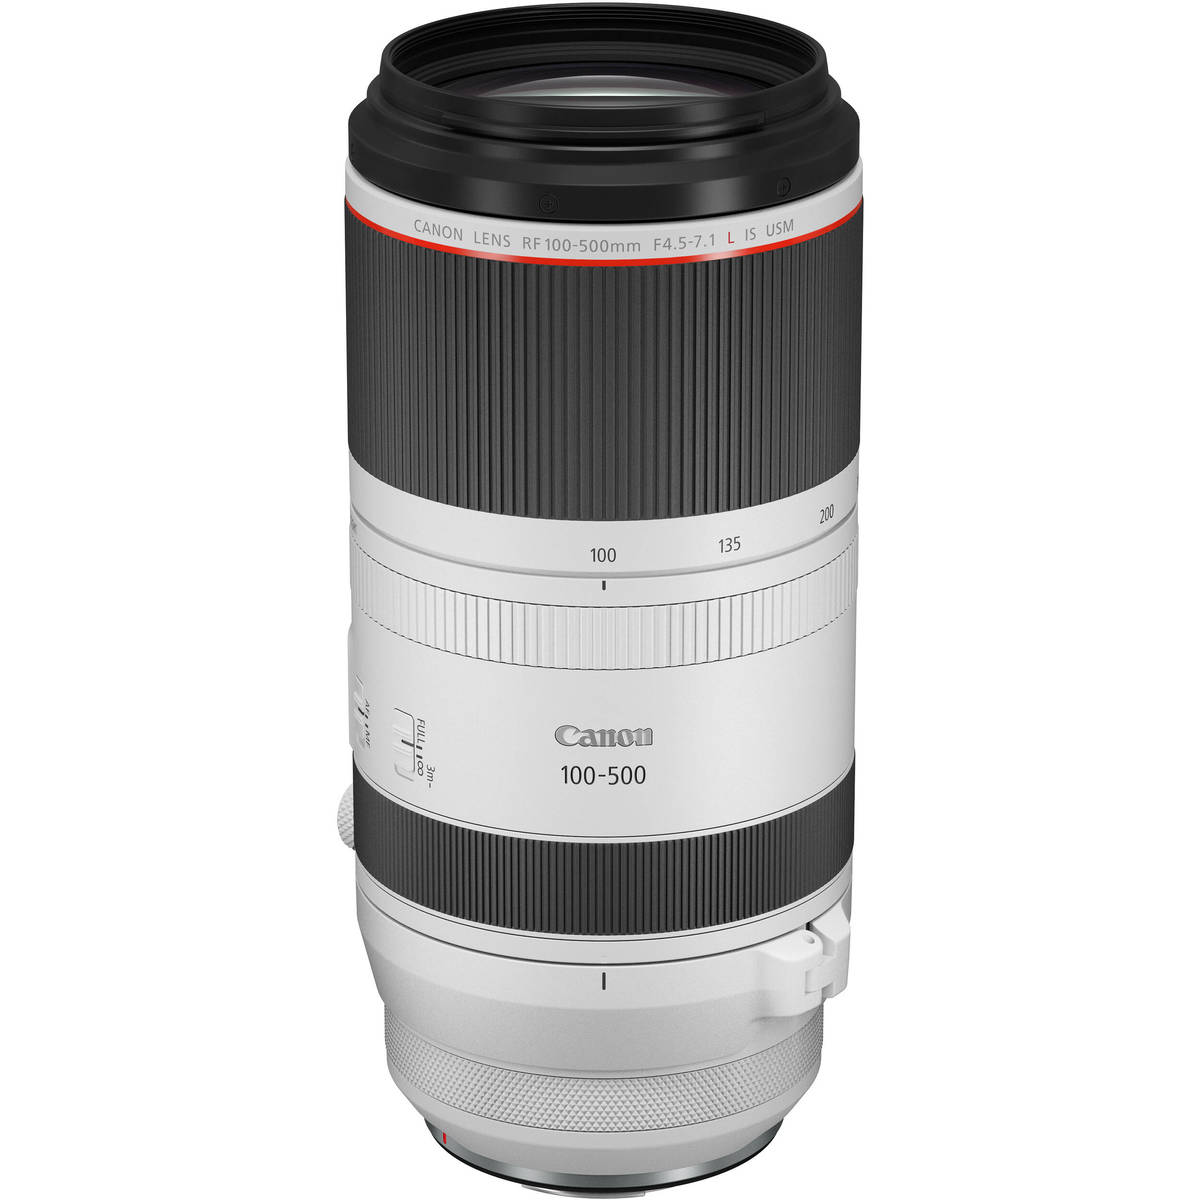 2. Canon RF 100-500mm F4.5-7.1L IS USM